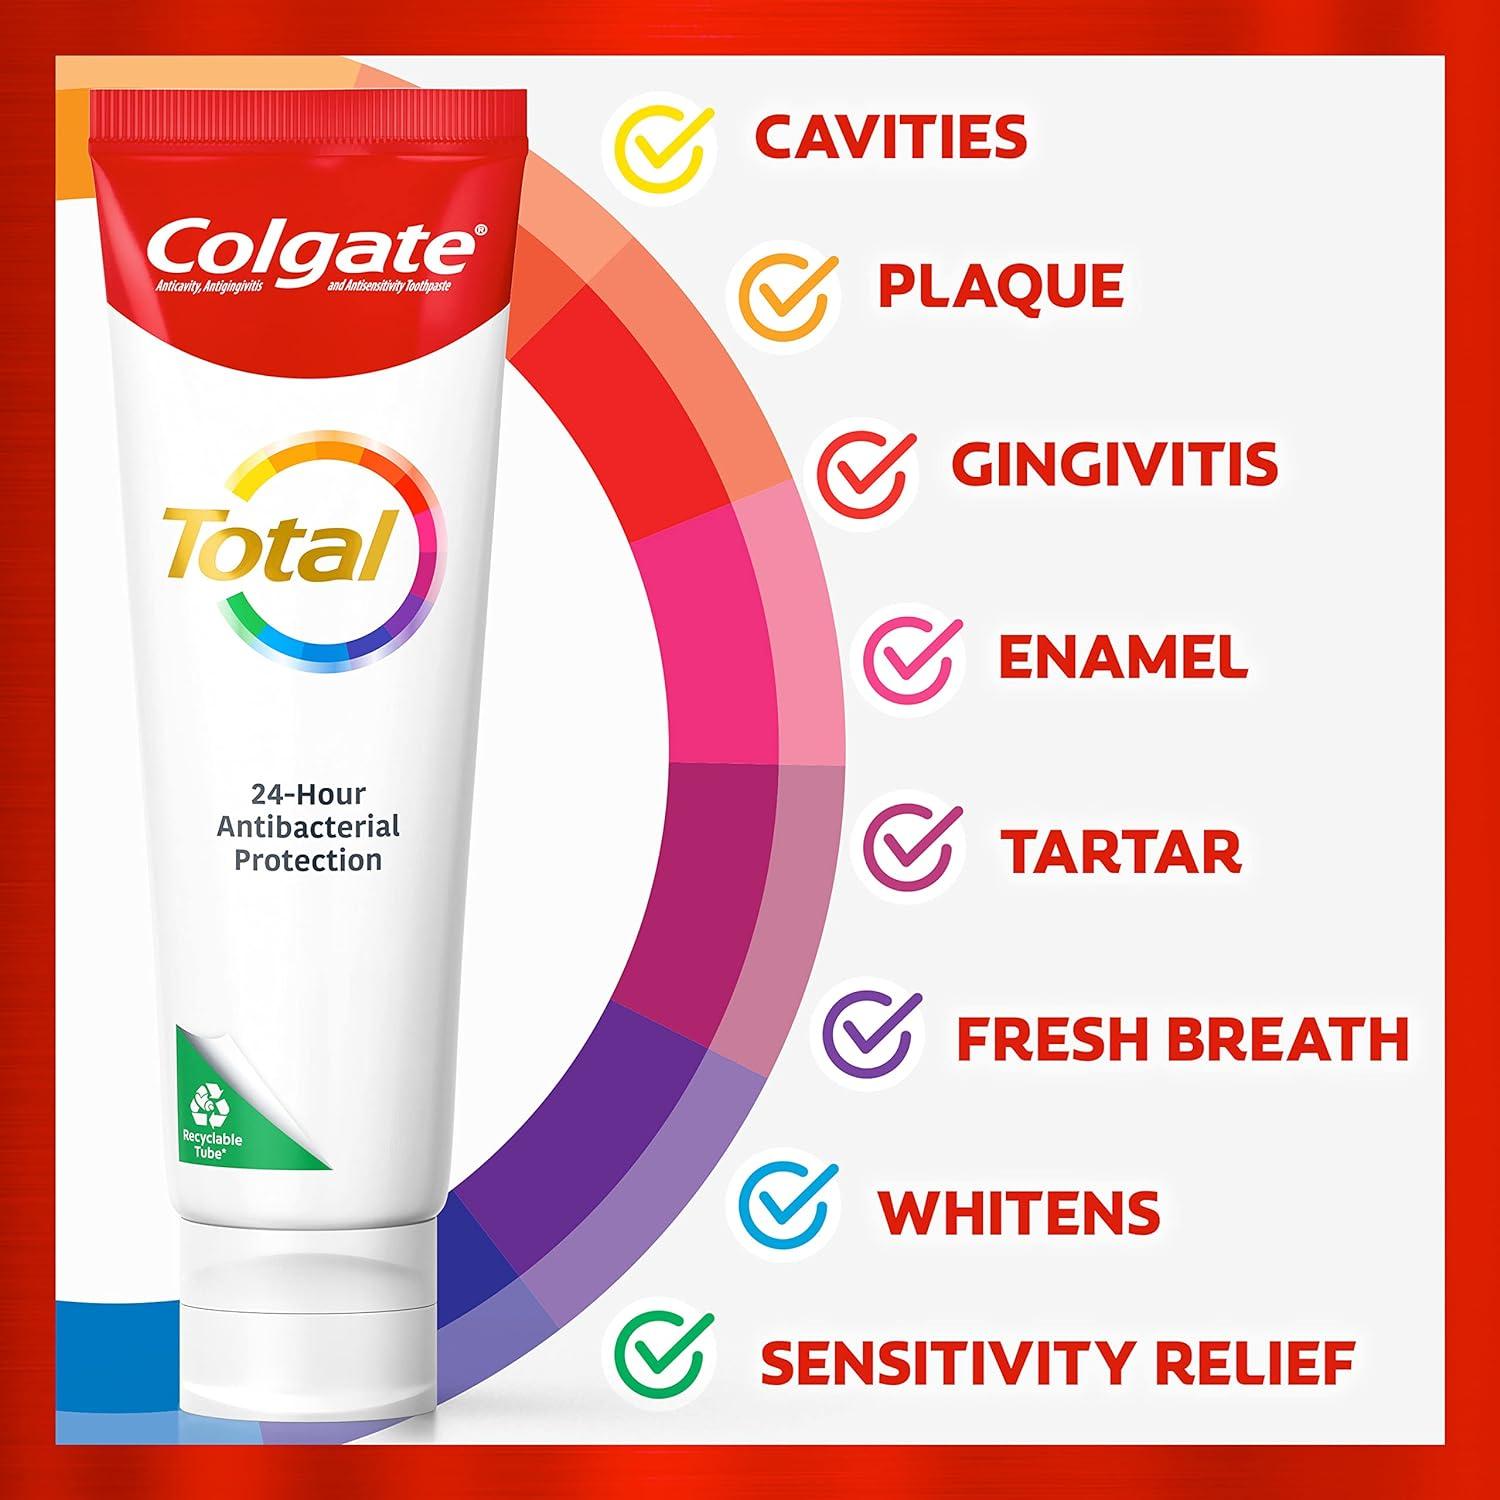 Colgate Cavity Protection Toothpaste, Anticavity Fluoride, Great Regular Flavor, Paste, Super Size - 5 pack, 8 oz tubes